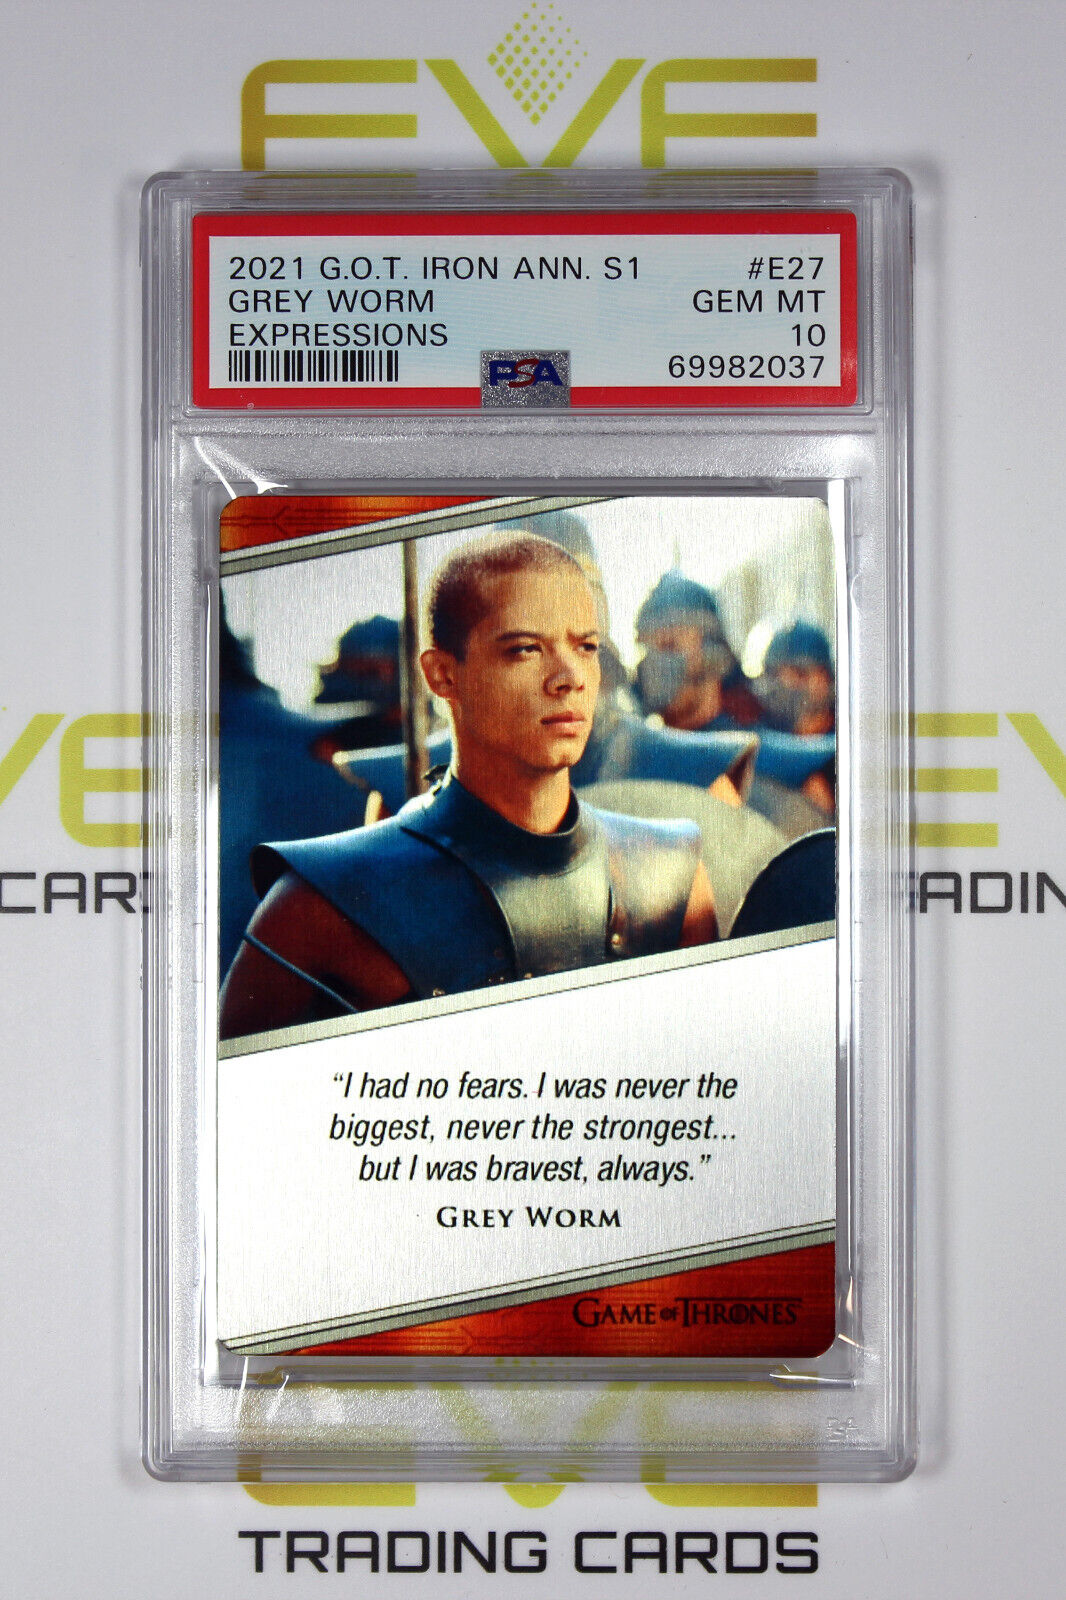 Graded Game of Thrones Card - #E27 2021 Grey Worm - Expressions - PSA 10